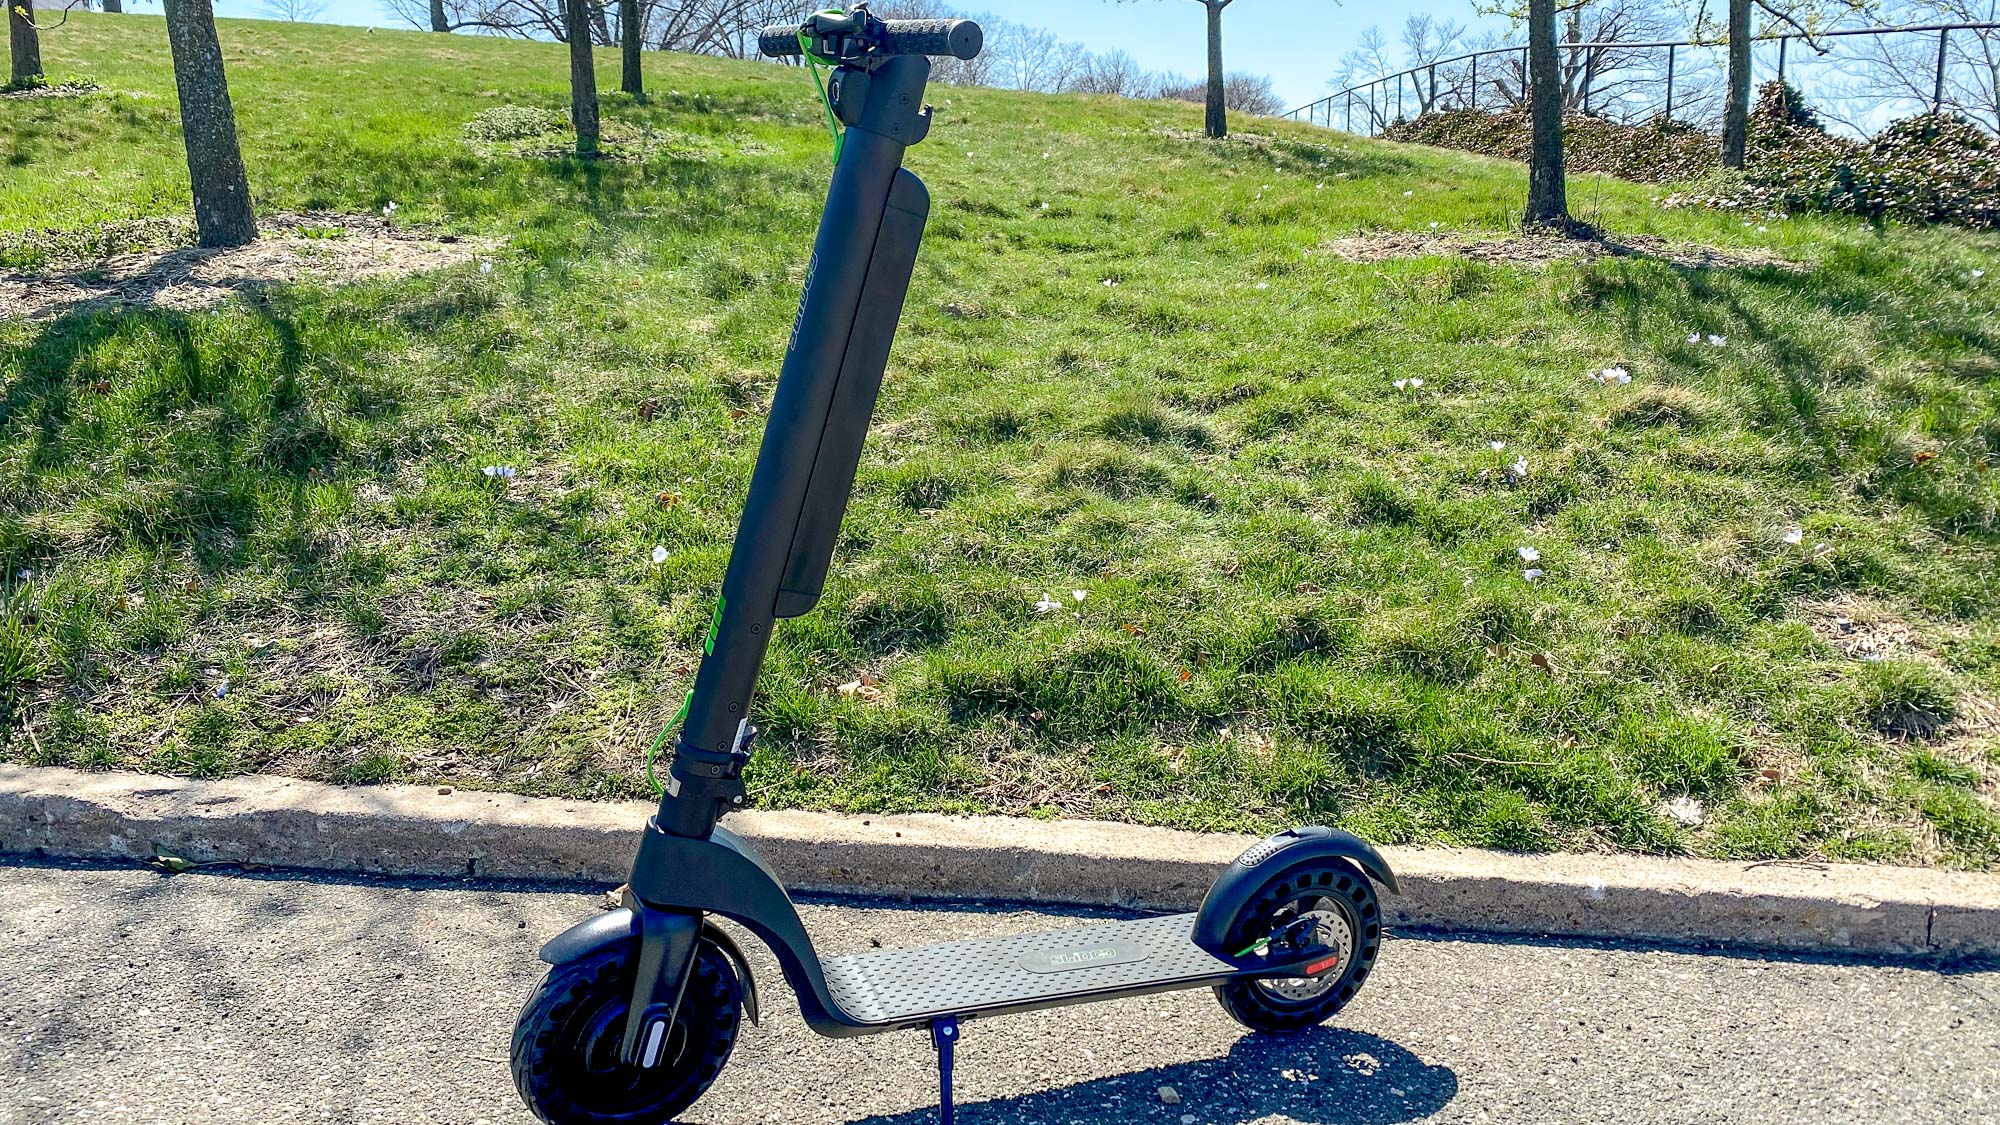 Slidgo X8 electric scooter review